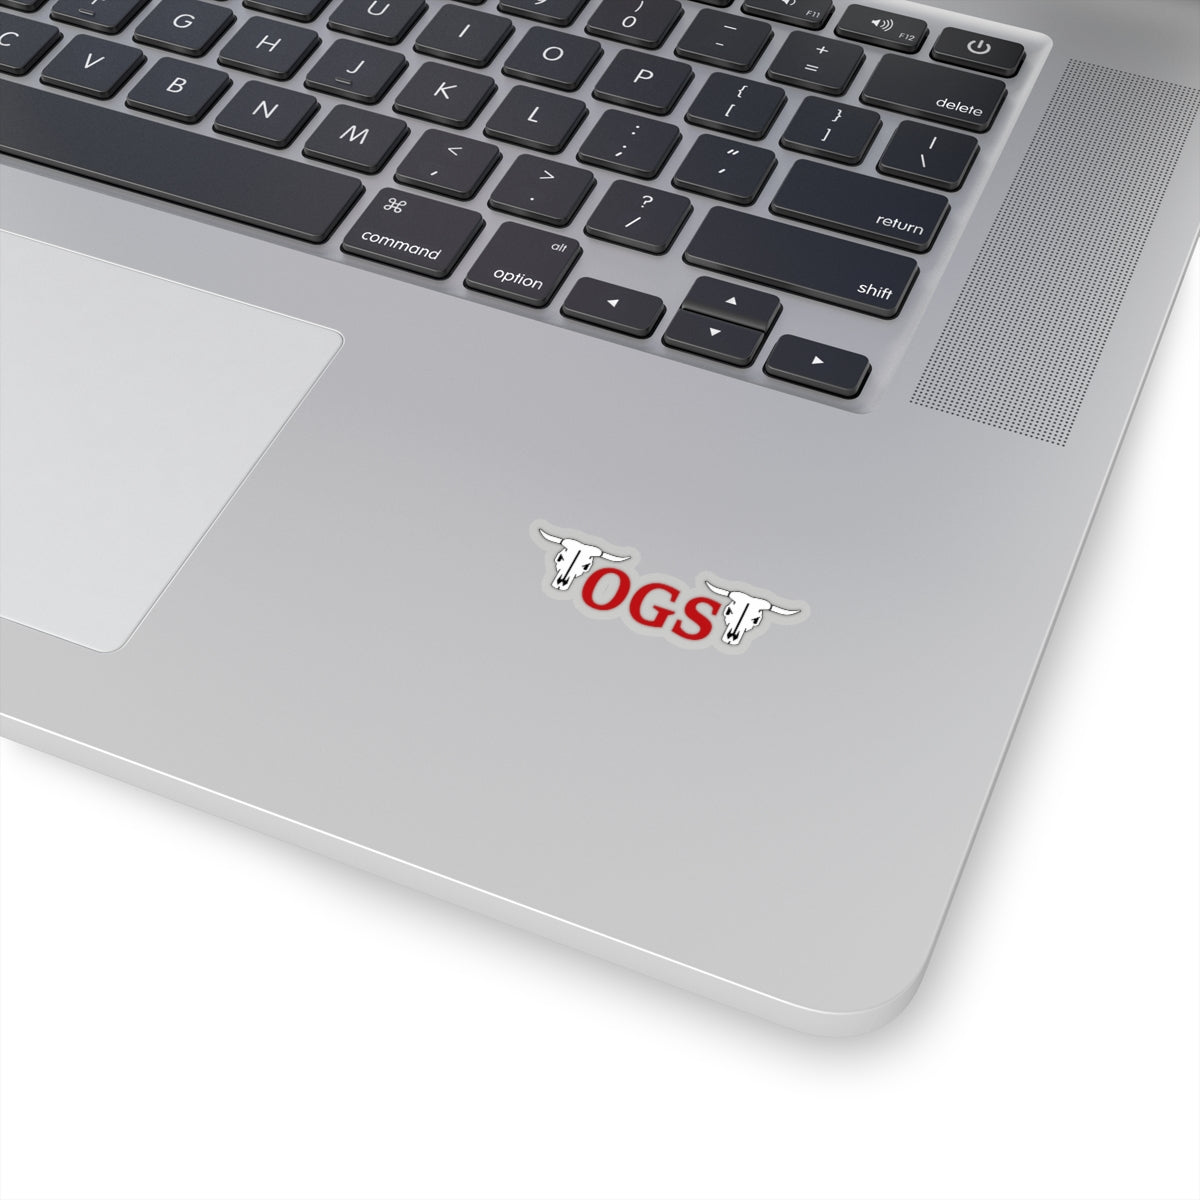 t-ogs STICKERS